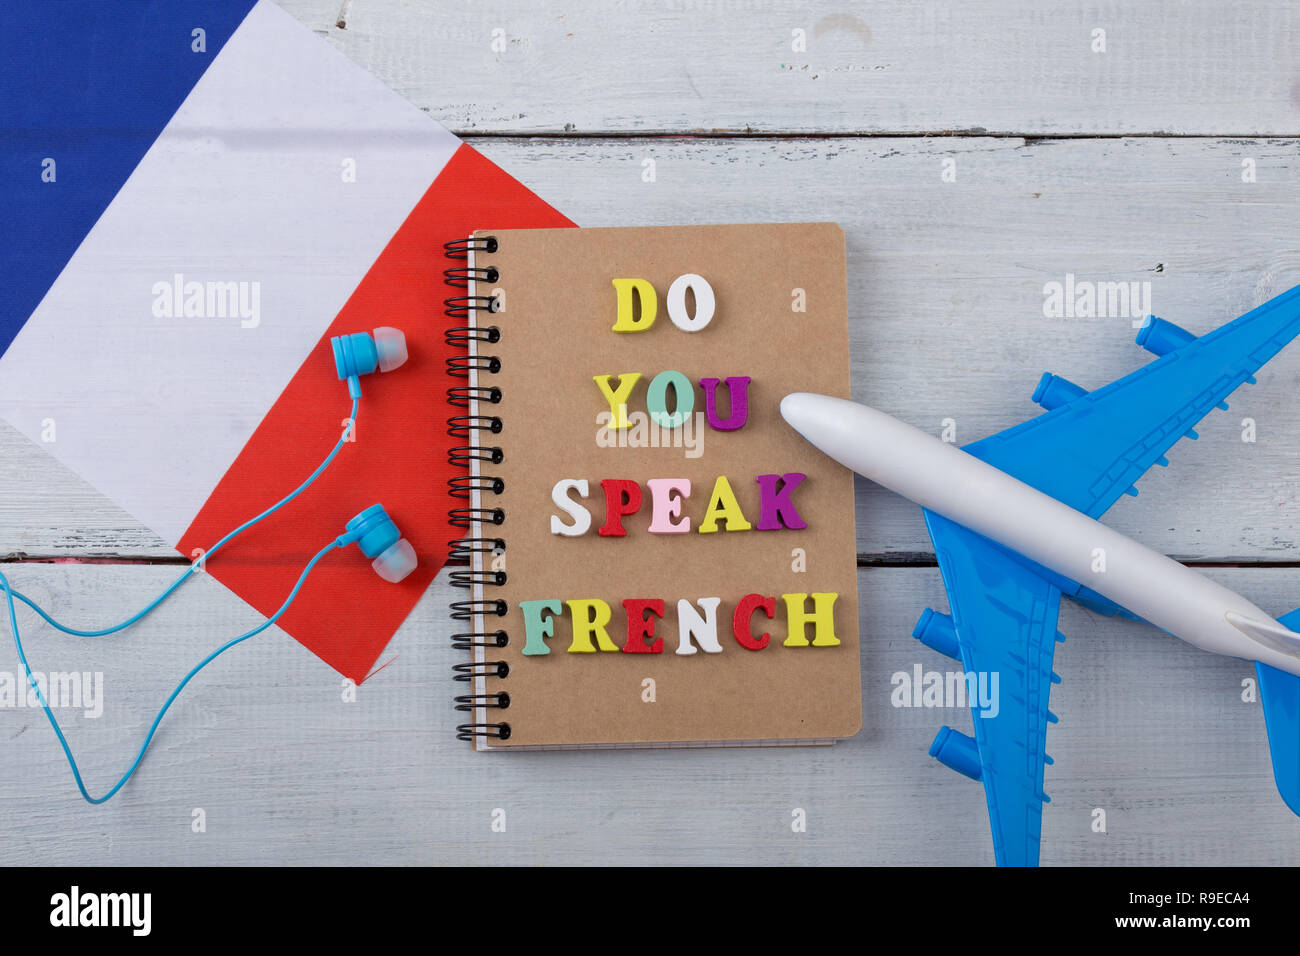 Concept of learning French language - colorful letters with text 'Do you speak French', flag of the France, airplane, headphones on white wooden backg Stock Photo